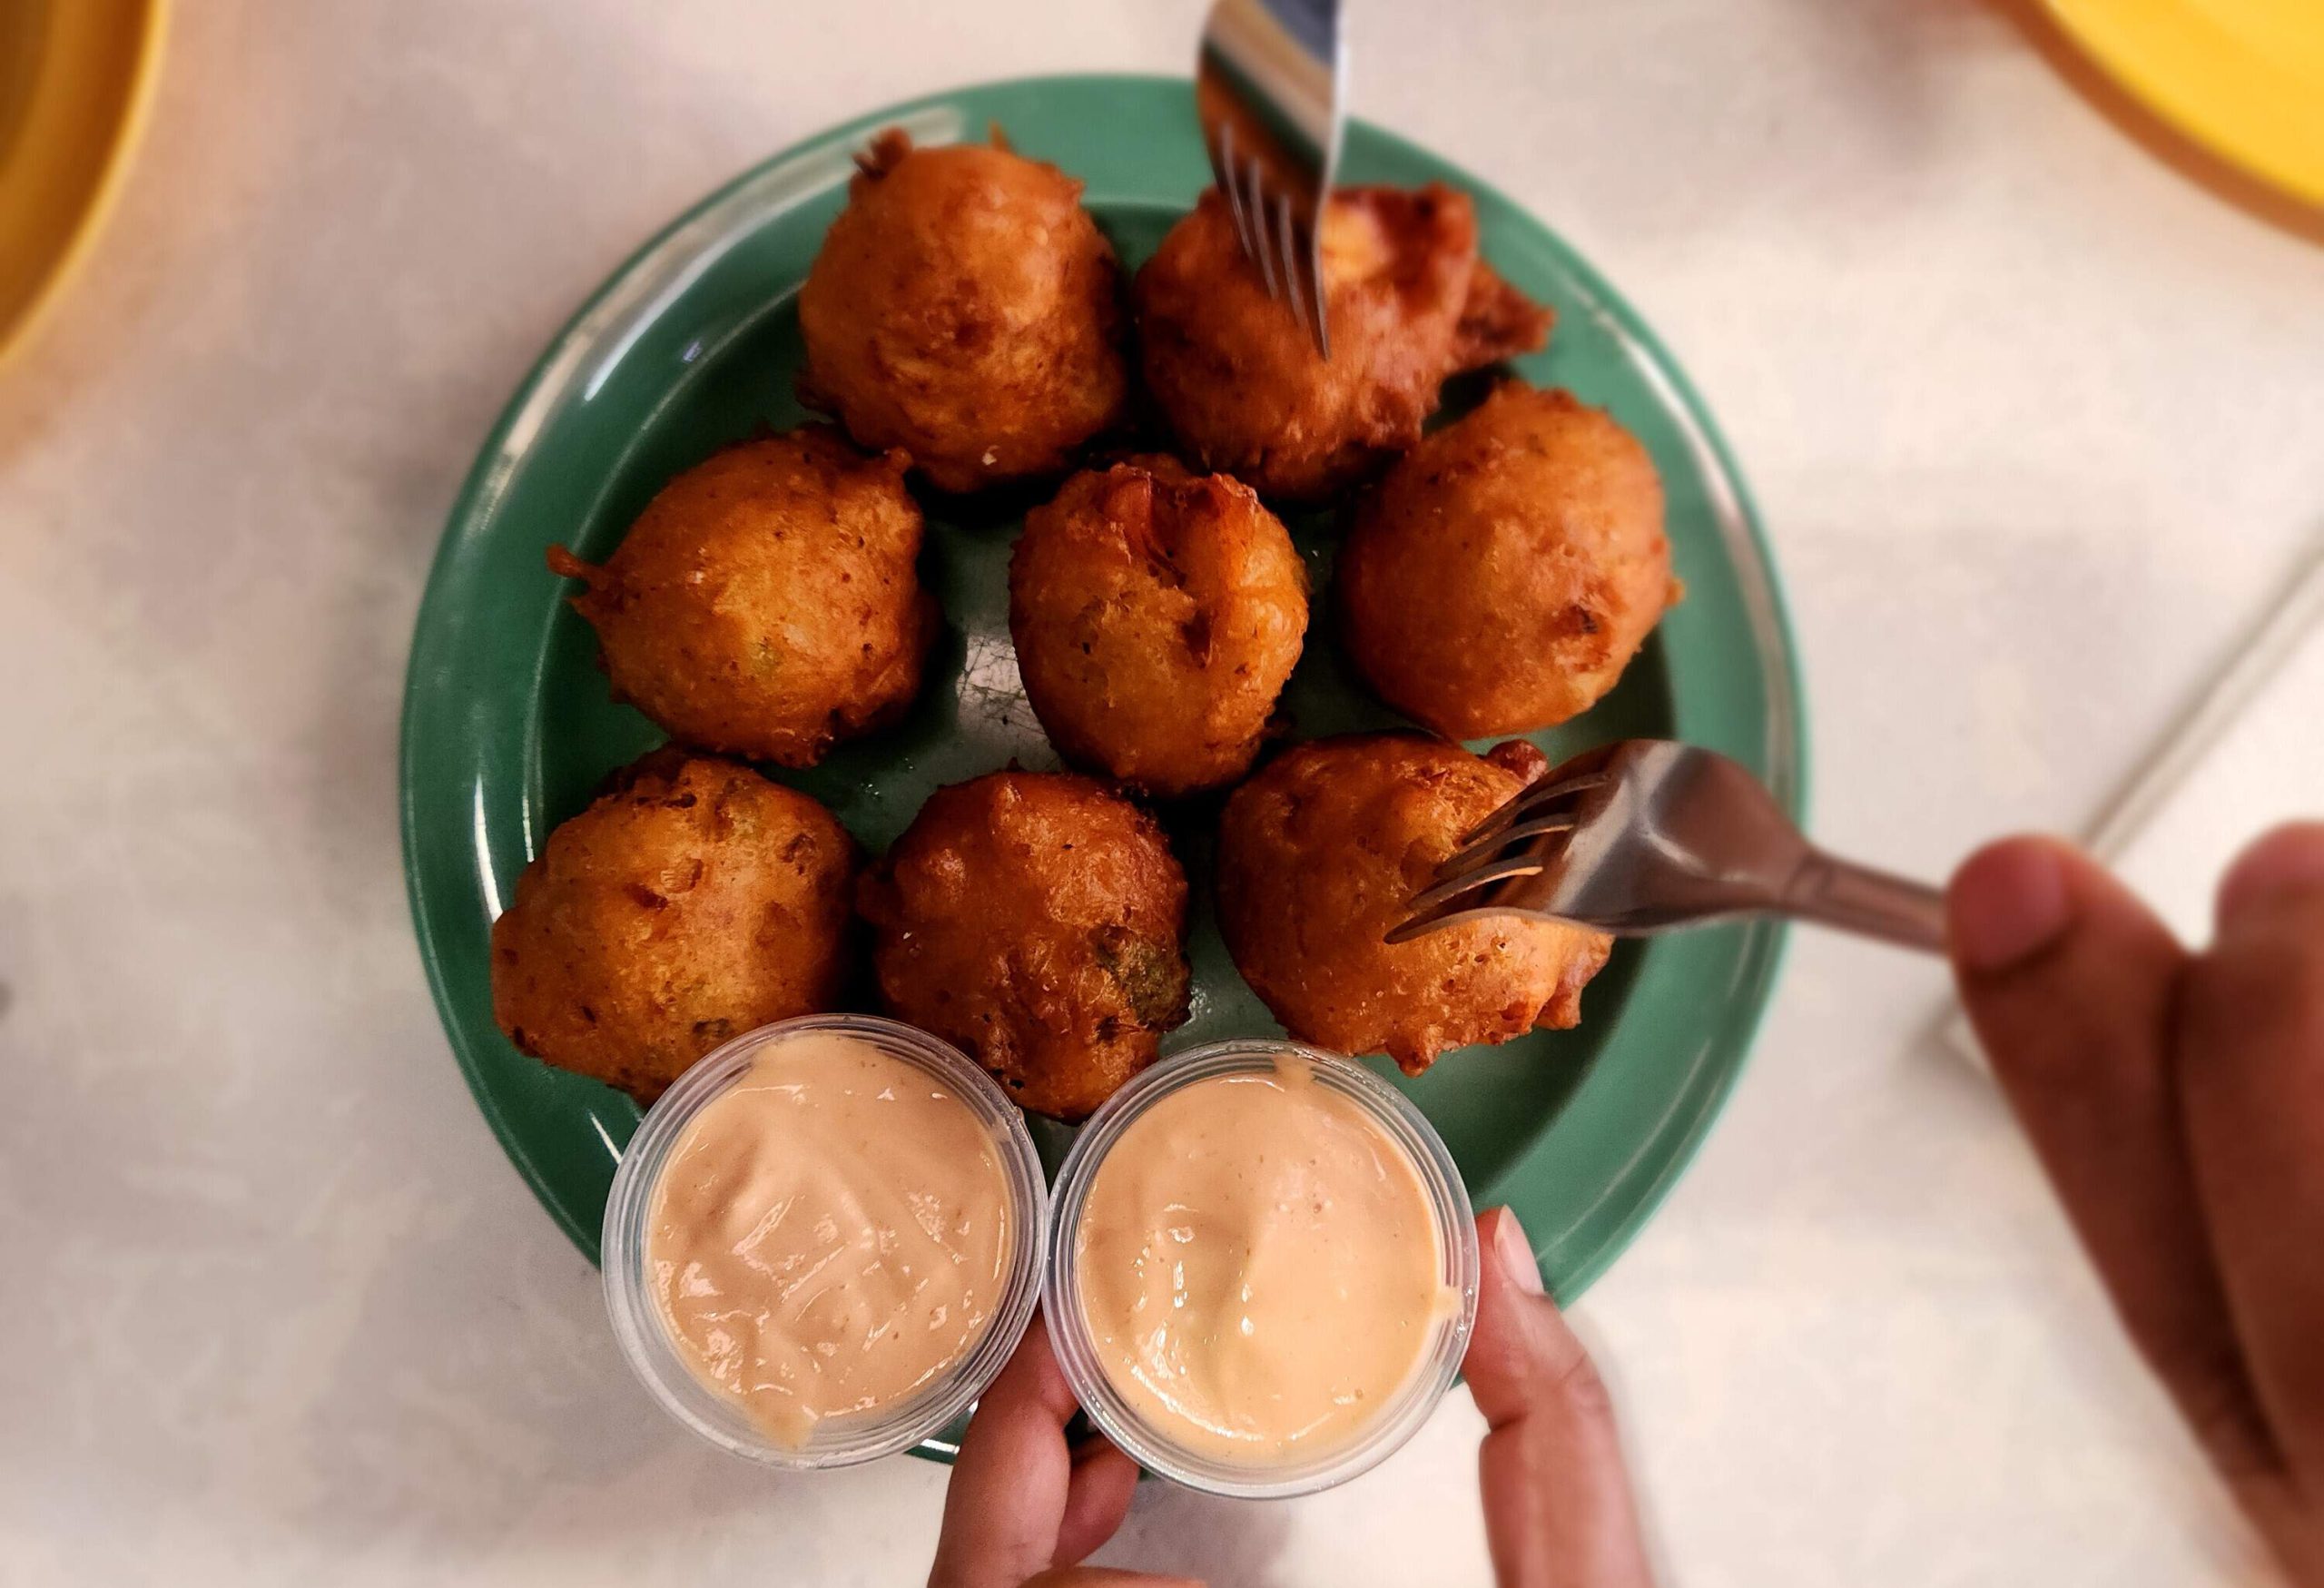 Conch fritters. The national dish of Bahamas.